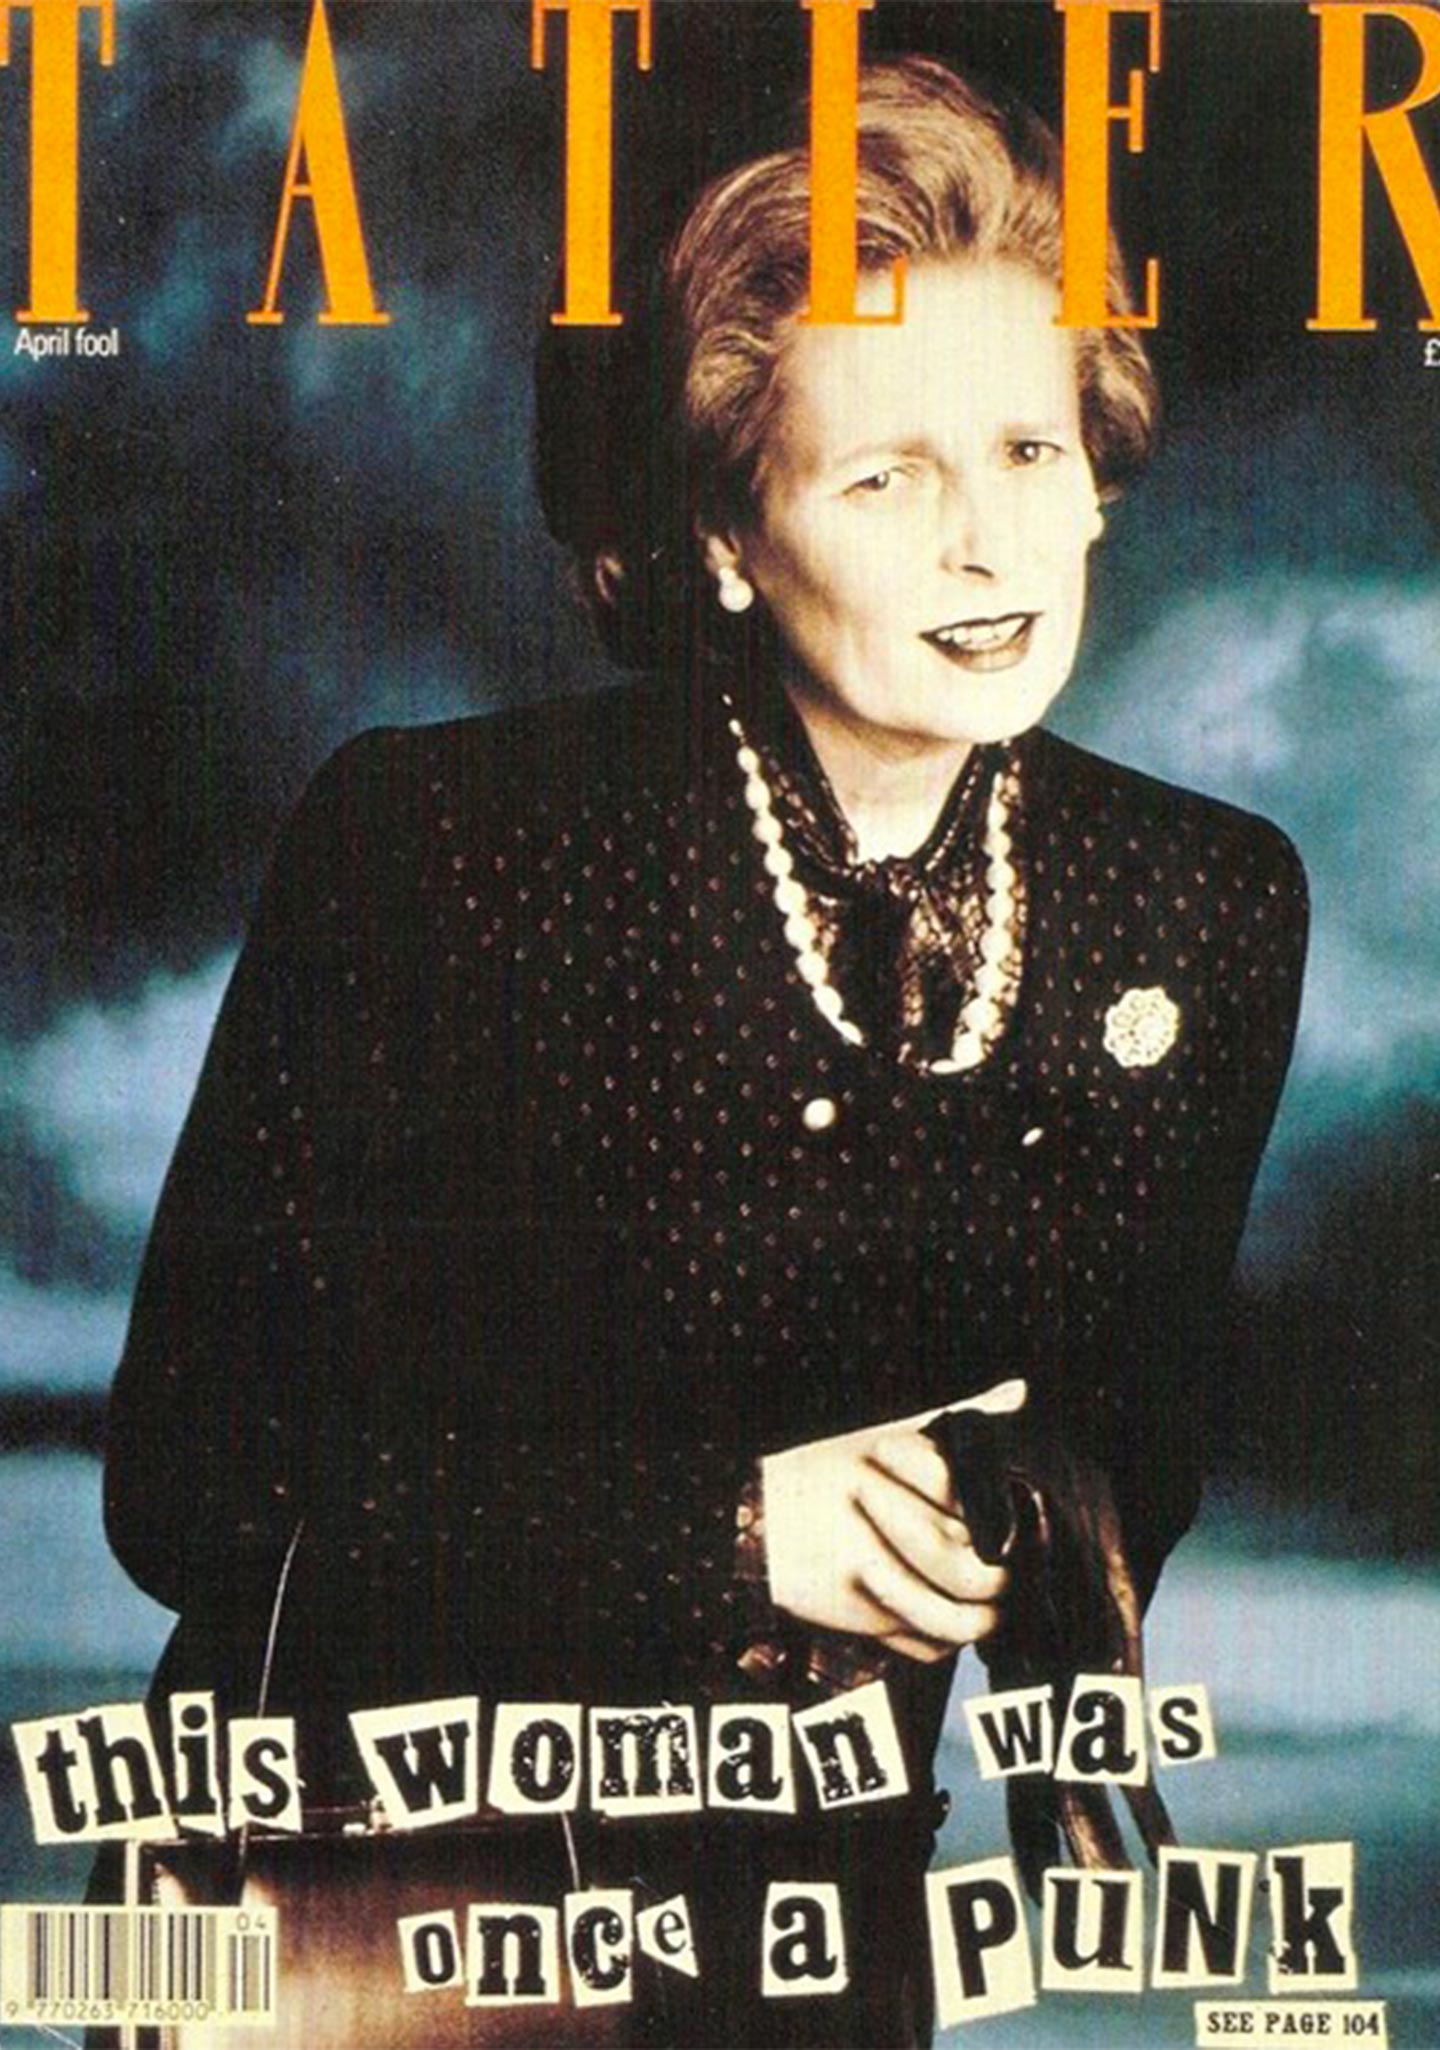 “This woman was once a punk” – Vivienne Westwood as Margaret Thatcher for Tatler’s April 1989 cover